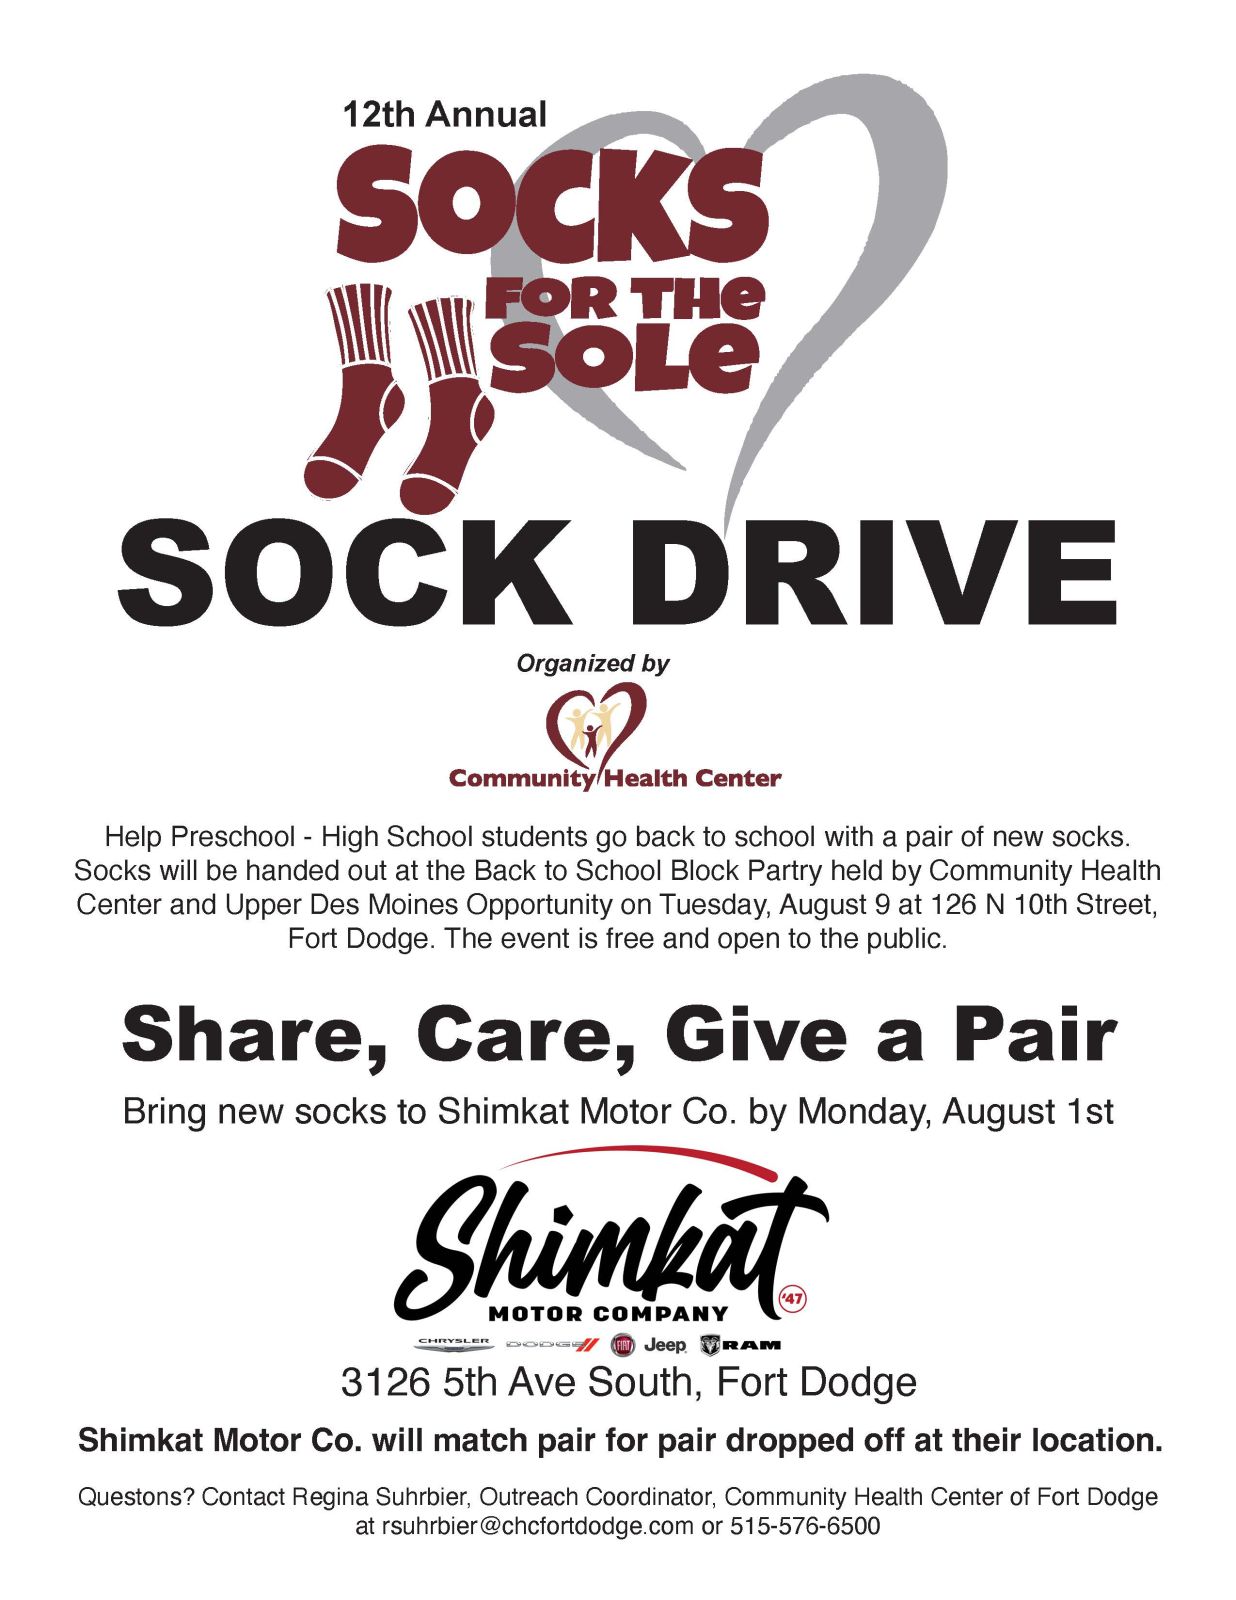 12th annual sock drive is starting Main Photo